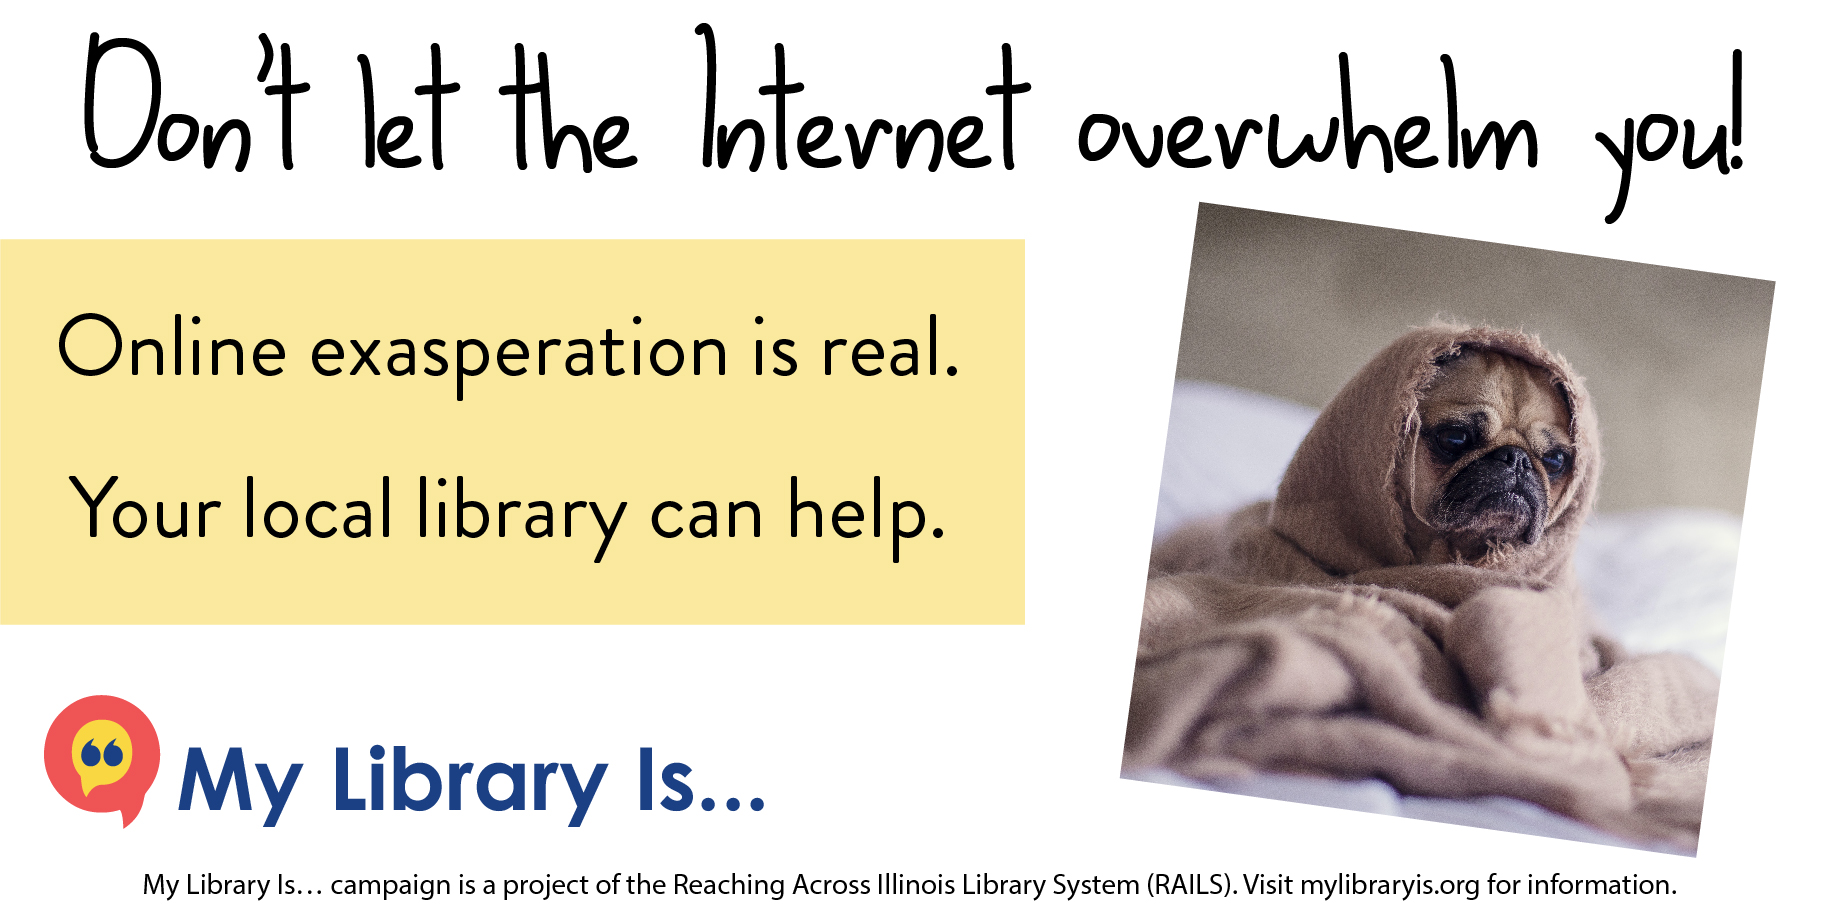 Image for Twitter. "Don't let the Internet overwhelm you! Online exasperation is real. Your local library can help." Footer provides mylibraryis.org URL.